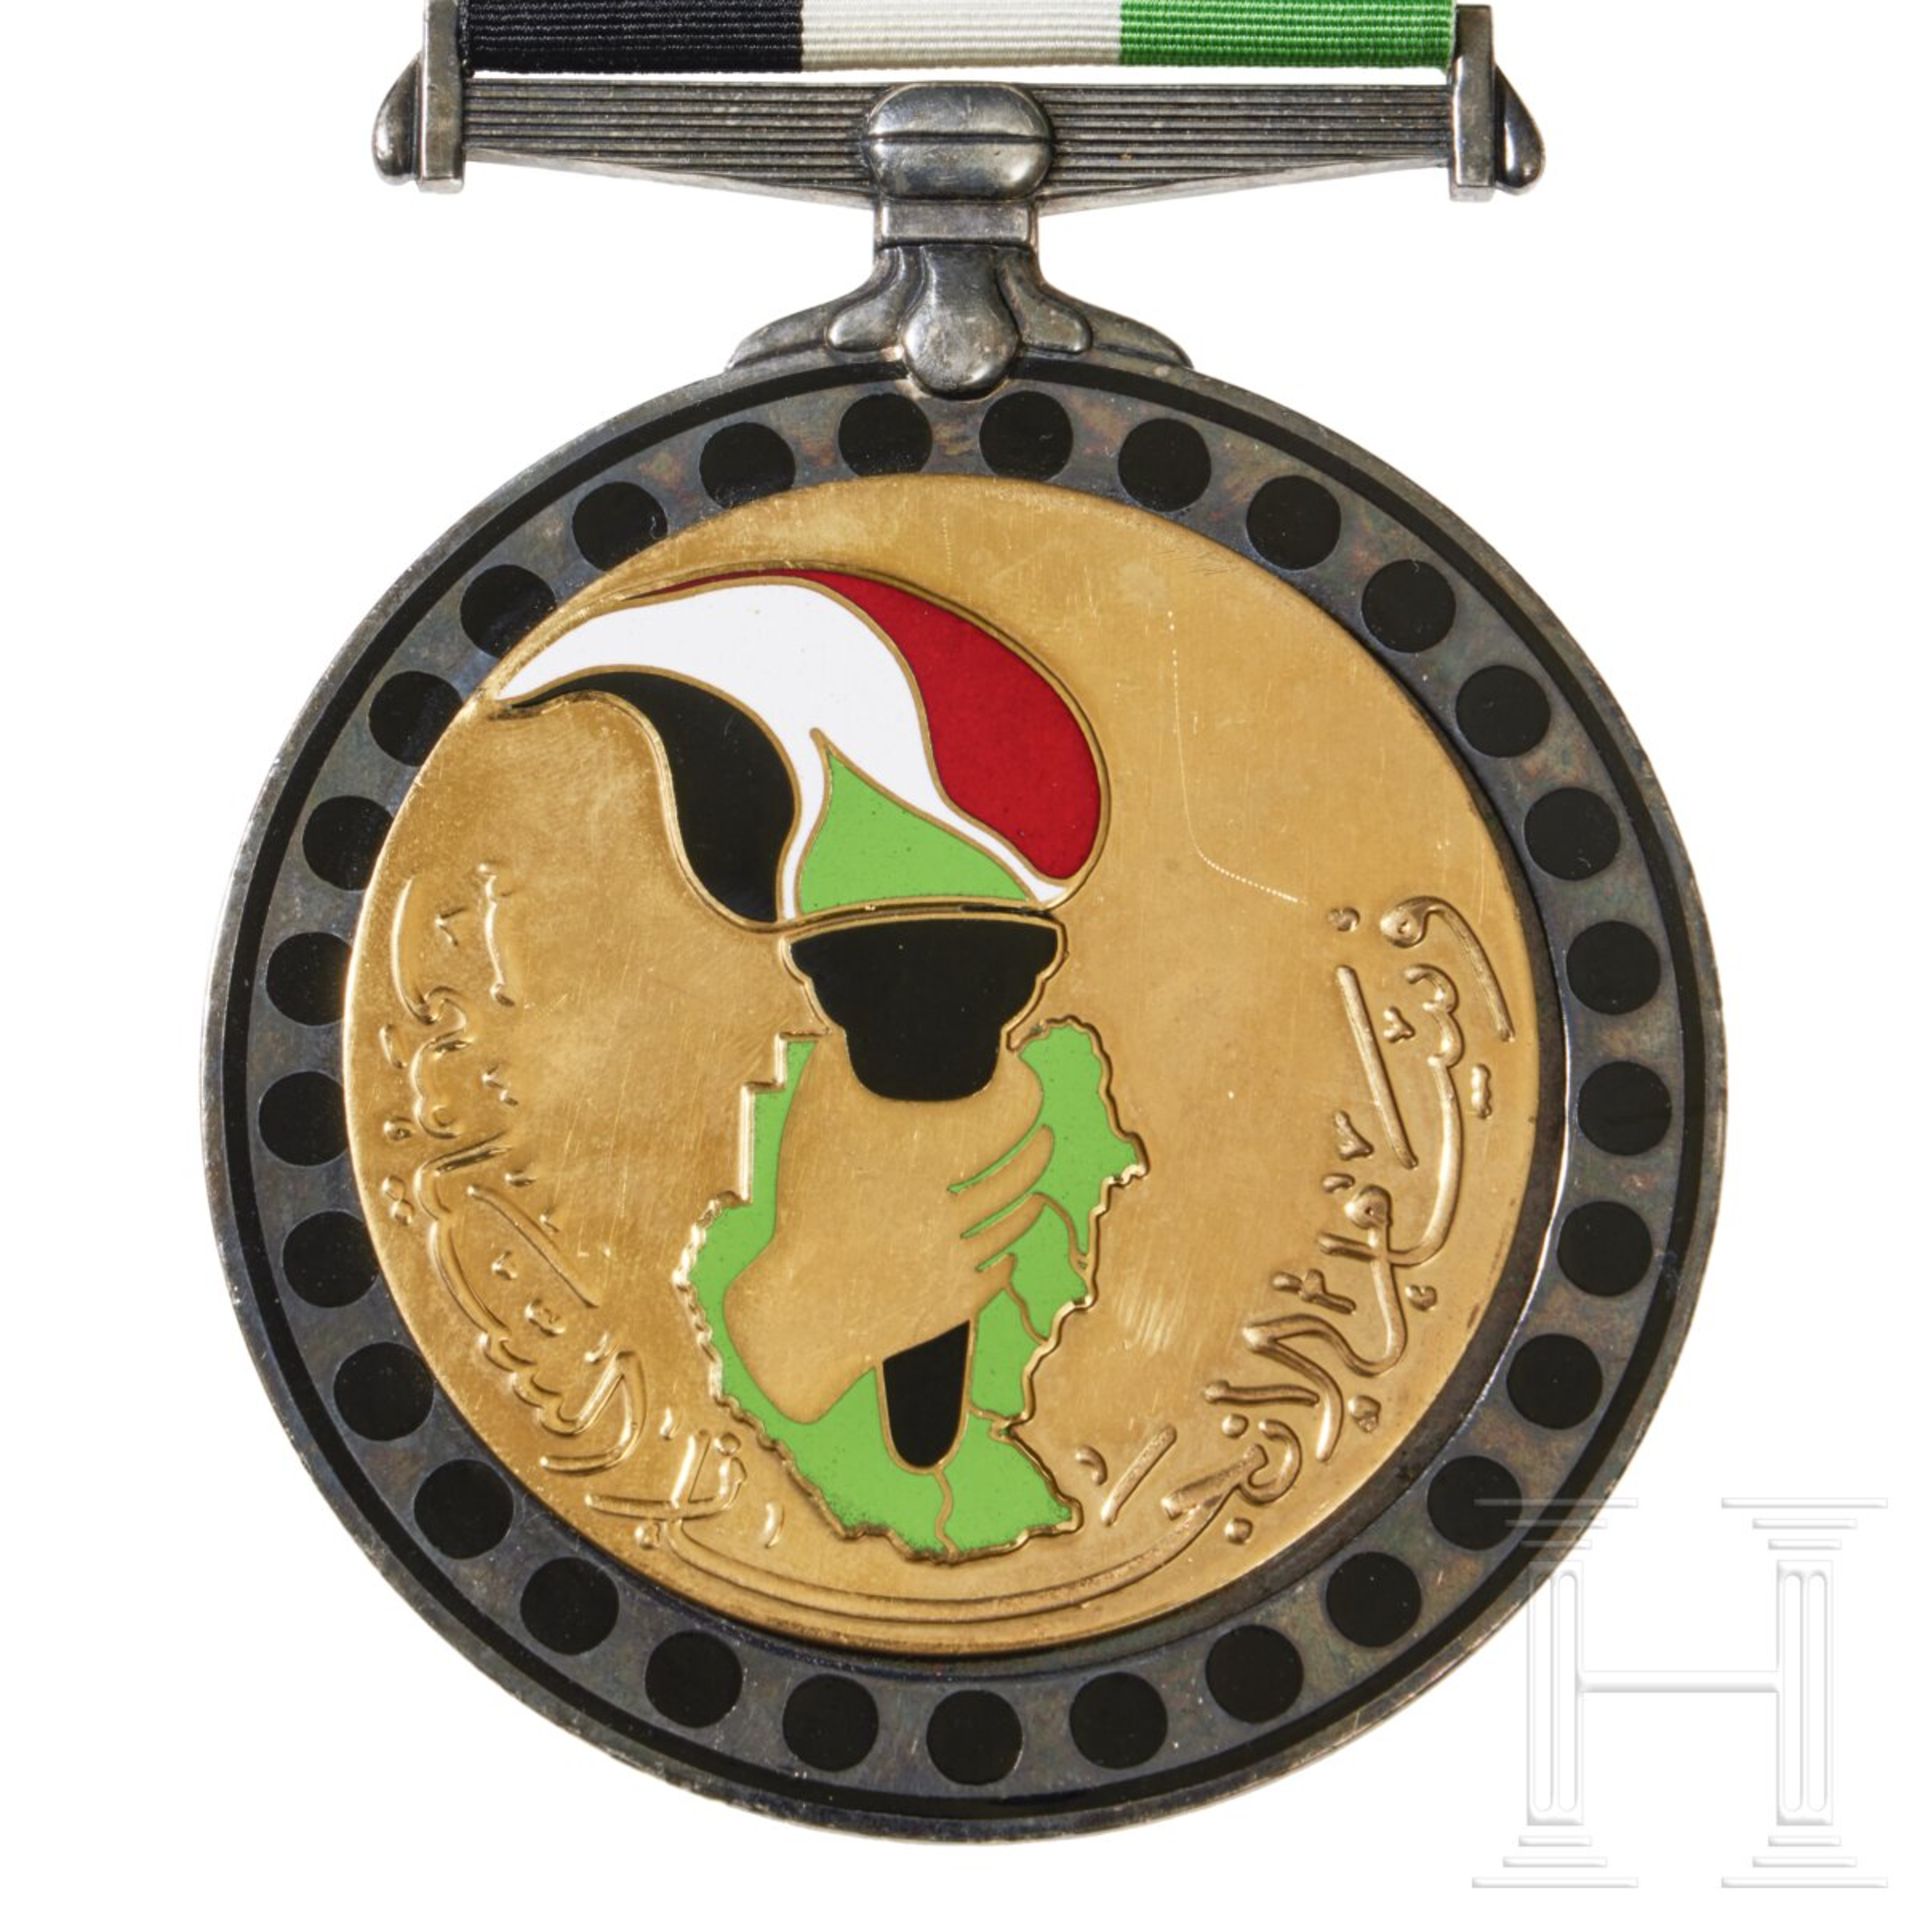 A Sudanese Order of Political Accomplishment - Image 3 of 3